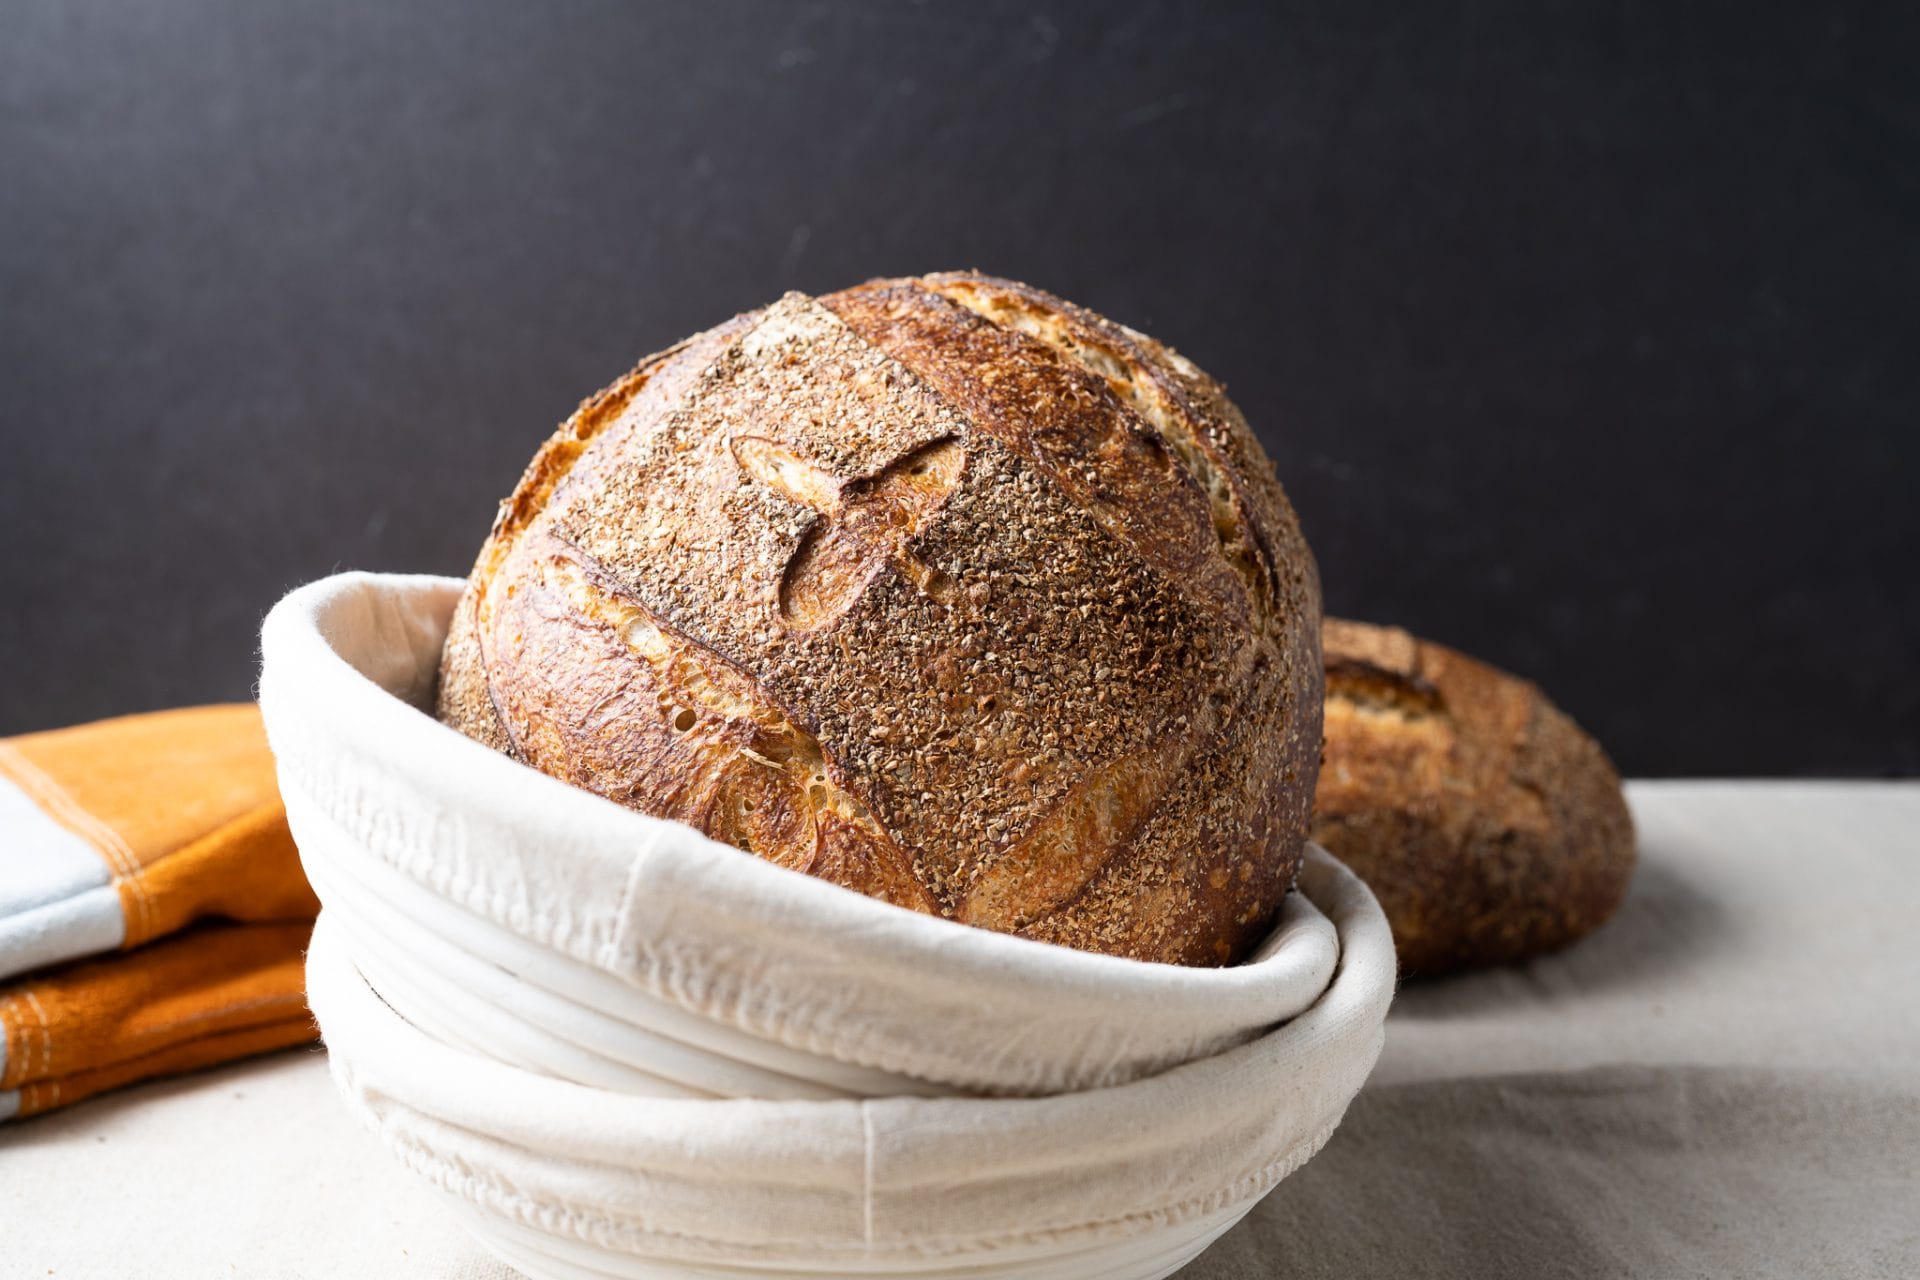 https://www.theperfectloaf.com/wp-content/uploads/2021/07/theperfectloaf-no-knead-sourdough-bread-1-1920x1280.jpg